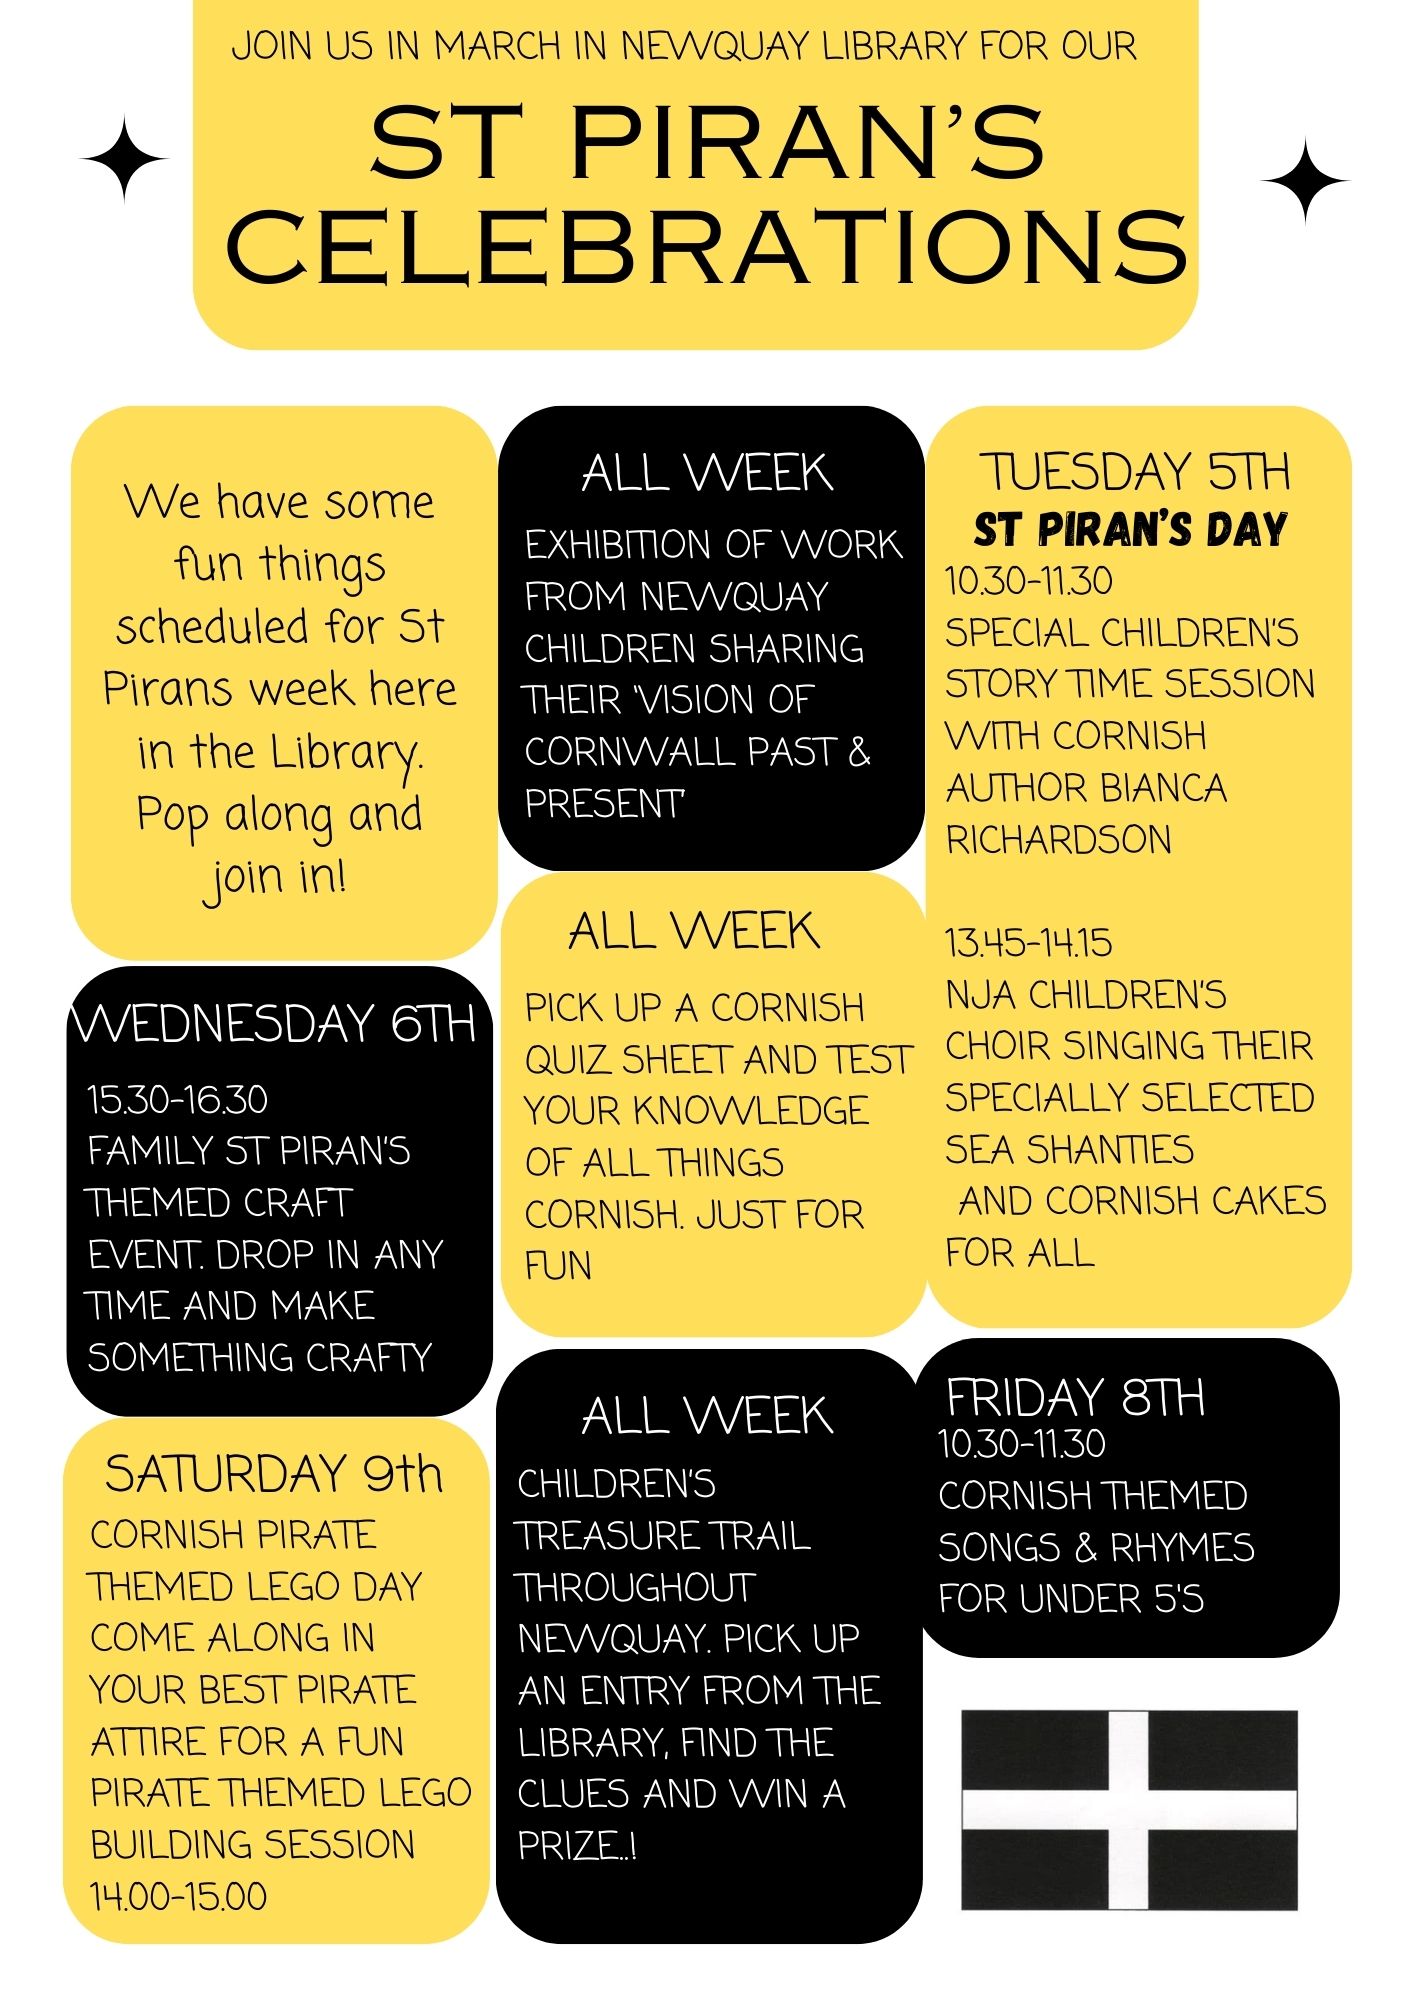 Newquay Library - St Piran's week events